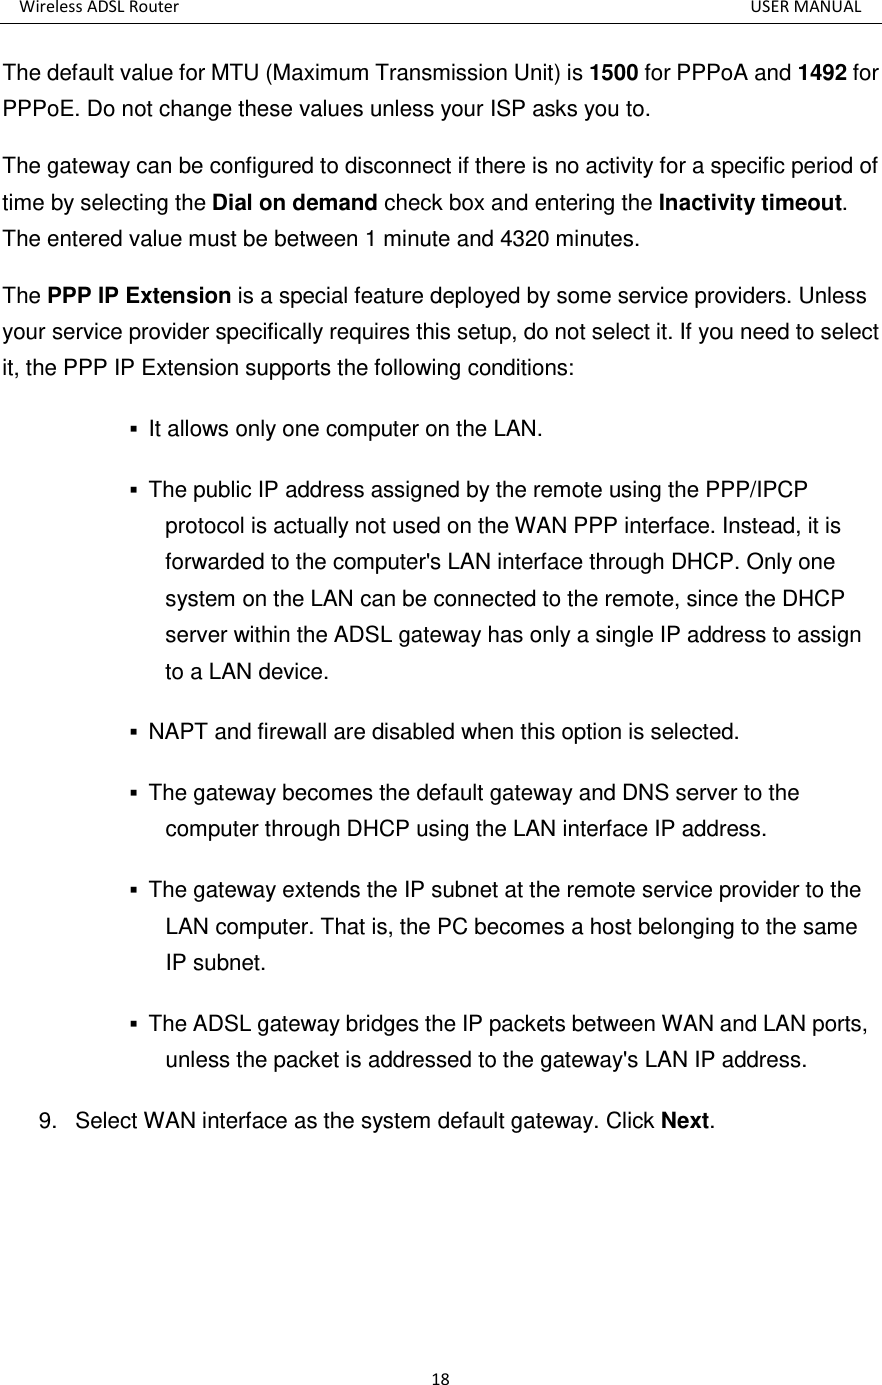 Wireless ADSL Router          USER MANUAL 18 The default value for MTU (Maximum Transmission Unit) is 1500 for PPPoA and 1492 for PPPoE. Do not change these values unless your ISP asks you to.   The gateway can be configured to disconnect if there is no activity for a specific period of time by selecting the Dial on demand check box and entering the Inactivity timeout. The entered value must be between 1 minute and 4320 minutes. The PPP IP Extension is a special feature deployed by some service providers. Unless your service provider specifically requires this setup, do not select it. If you need to select it, the PPP IP Extension supports the following conditions:  It allows only one computer on the LAN.    The public IP address assigned by the remote using the PPP/IPCP protocol is actually not used on the WAN PPP interface. Instead, it is forwarded to the computer&apos;s LAN interface through DHCP. Only one system on the LAN can be connected to the remote, since the DHCP server within the ADSL gateway has only a single IP address to assign to a LAN device.    NAPT and firewall are disabled when this option is selected.    The gateway becomes the default gateway and DNS server to the computer through DHCP using the LAN interface IP address.    The gateway extends the IP subnet at the remote service provider to the LAN computer. That is, the PC becomes a host belonging to the same IP subnet.    The ADSL gateway bridges the IP packets between WAN and LAN ports, unless the packet is addressed to the gateway&apos;s LAN IP address.   9.  Select WAN interface as the system default gateway. Click Next. 